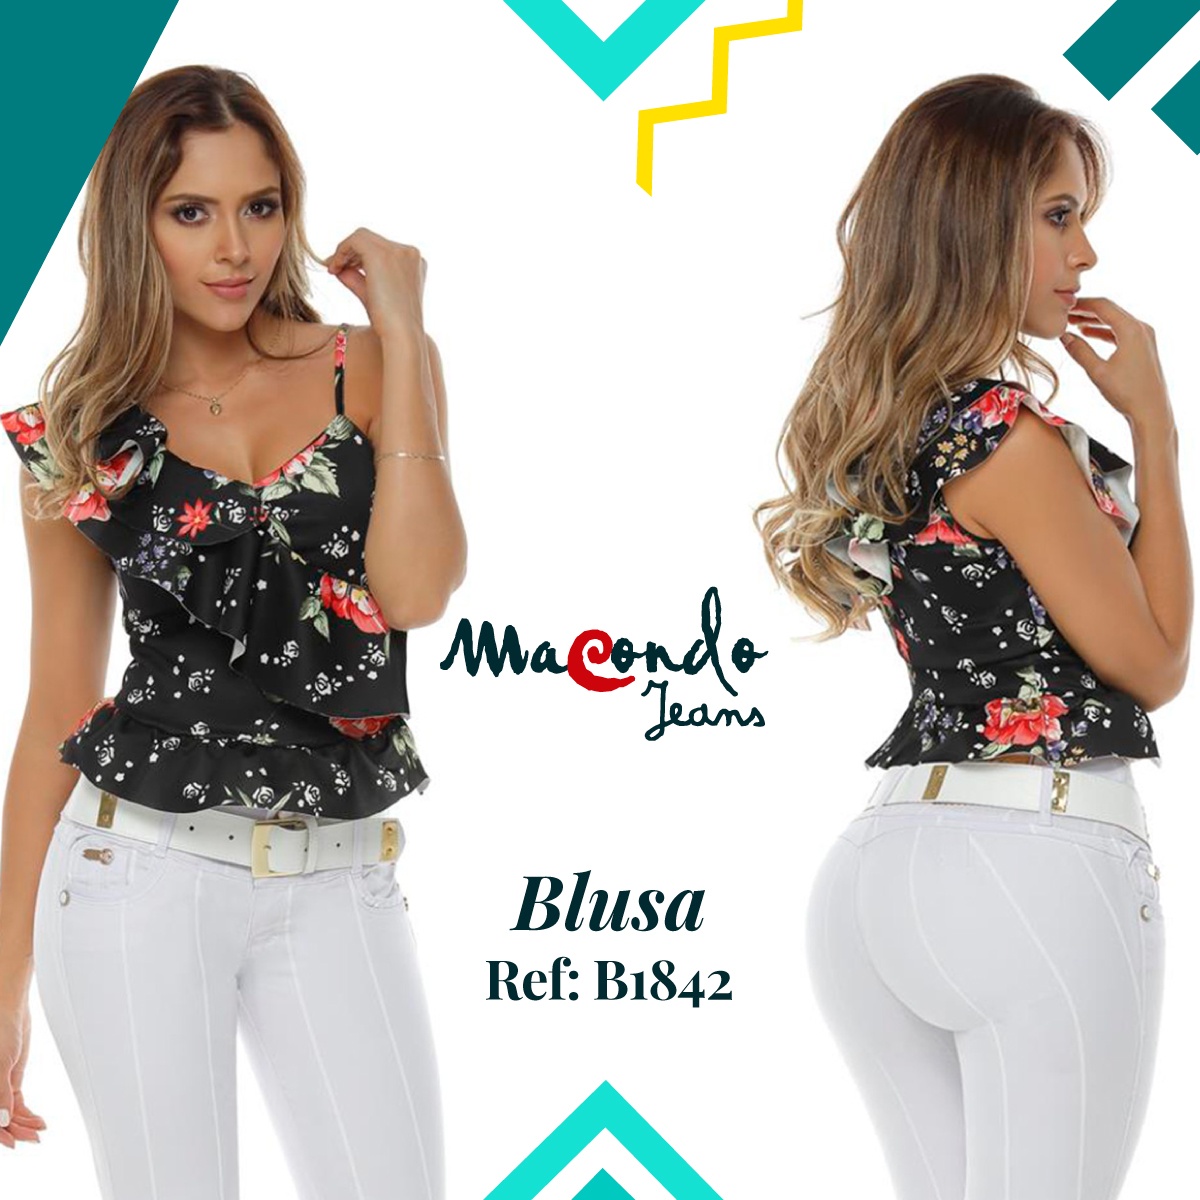 blusa-B1842-jeans-colombianos-online Macondo Jeans Colombianos